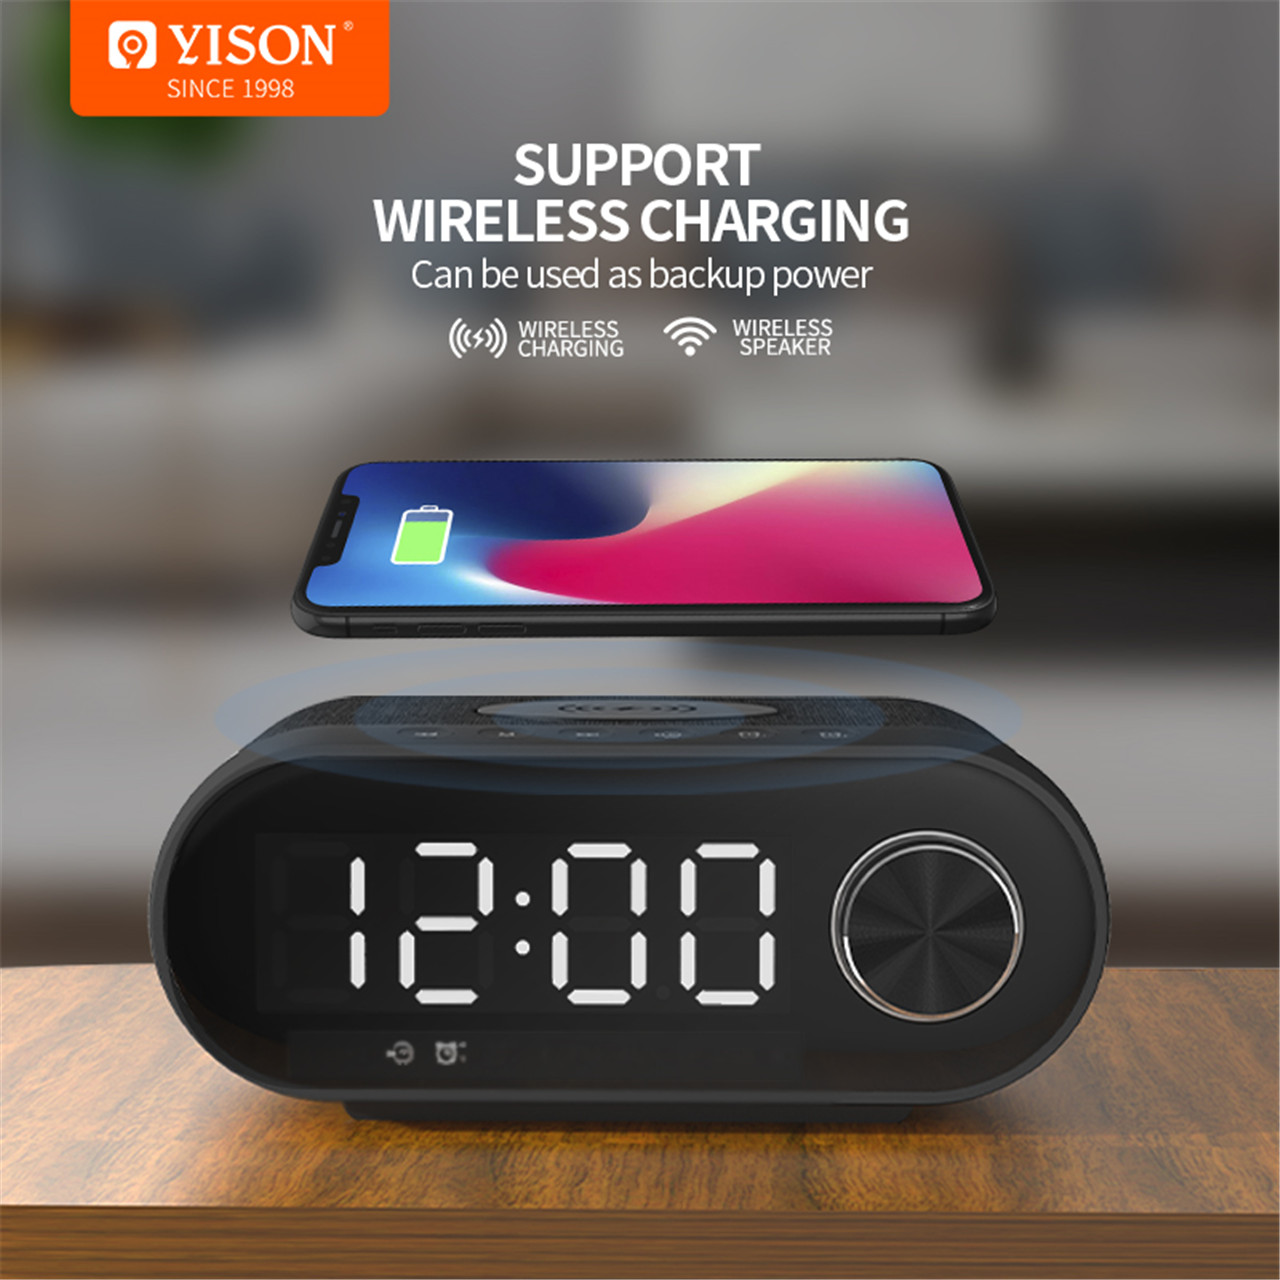 Wholesale Best Vivitar Bluetooth Speaker Supplier –  2022 WS-4 Digital LED Alarm Clock with Wireless Charger – YISON